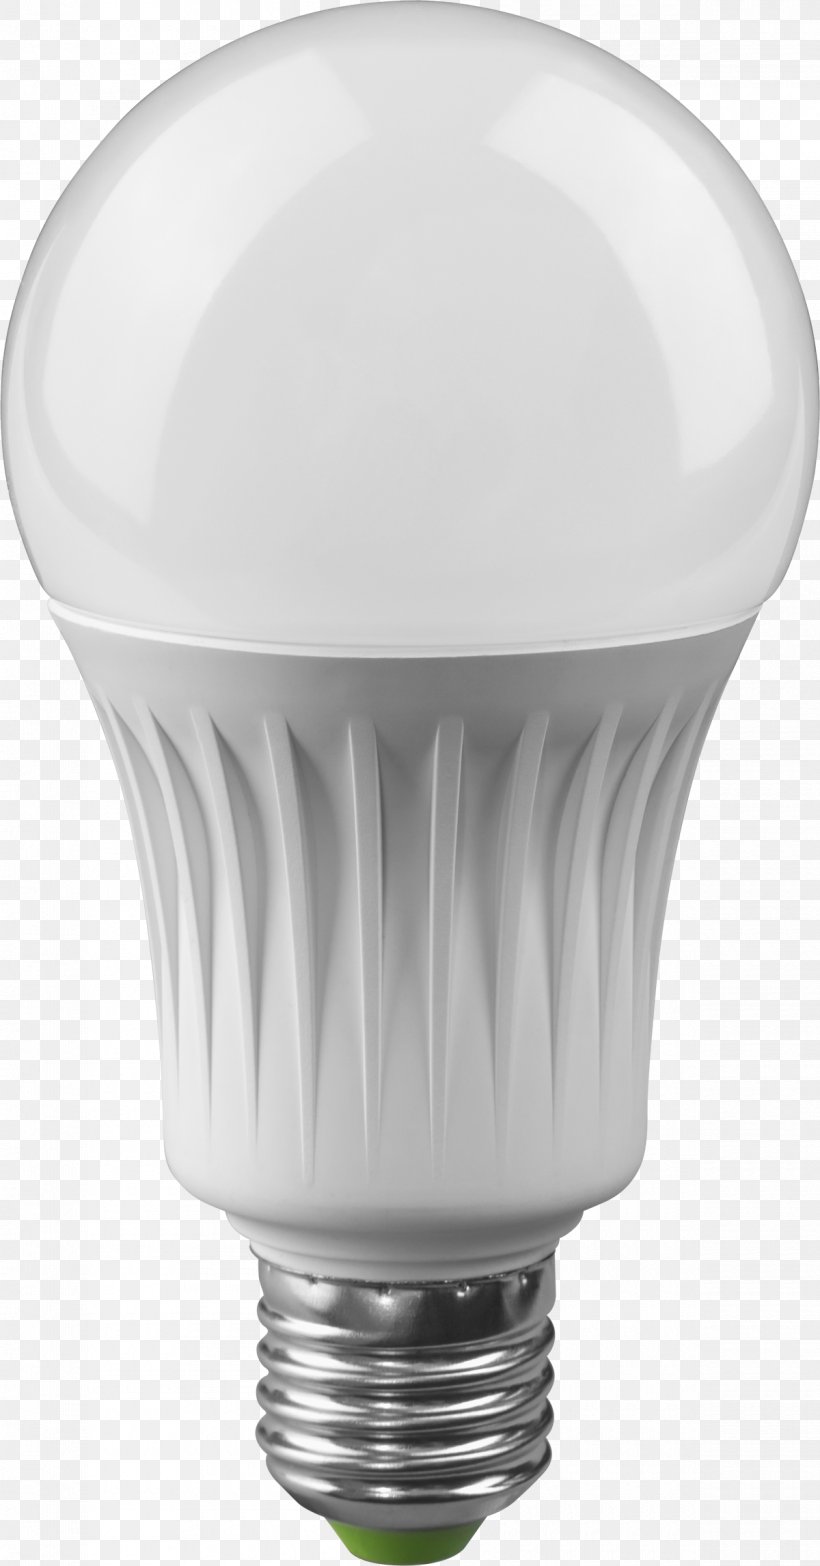 Lighting LED Lamp Incandescent Light Bulb, PNG, 1200x2292px, Light, Chandelier, Compact Fluorescent Lamp, Edison Screw, Energy Saving Lamp Download Free